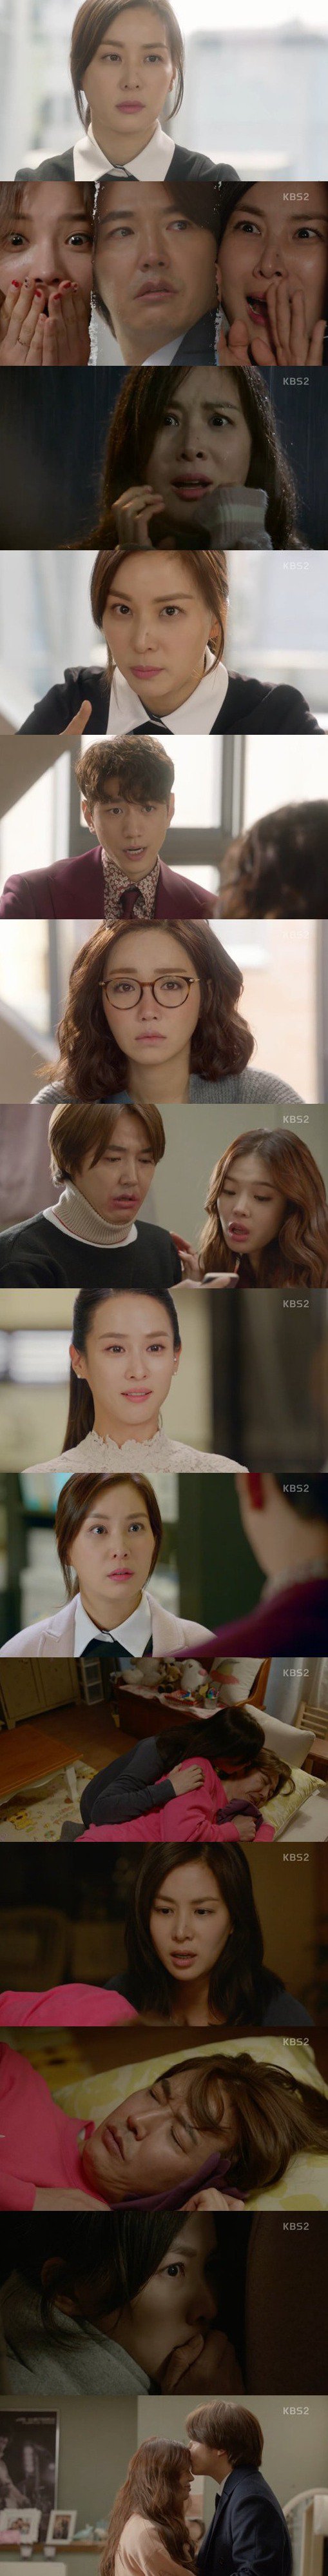 episode 1 captures for the Korean drama 'The Perfect Wife'